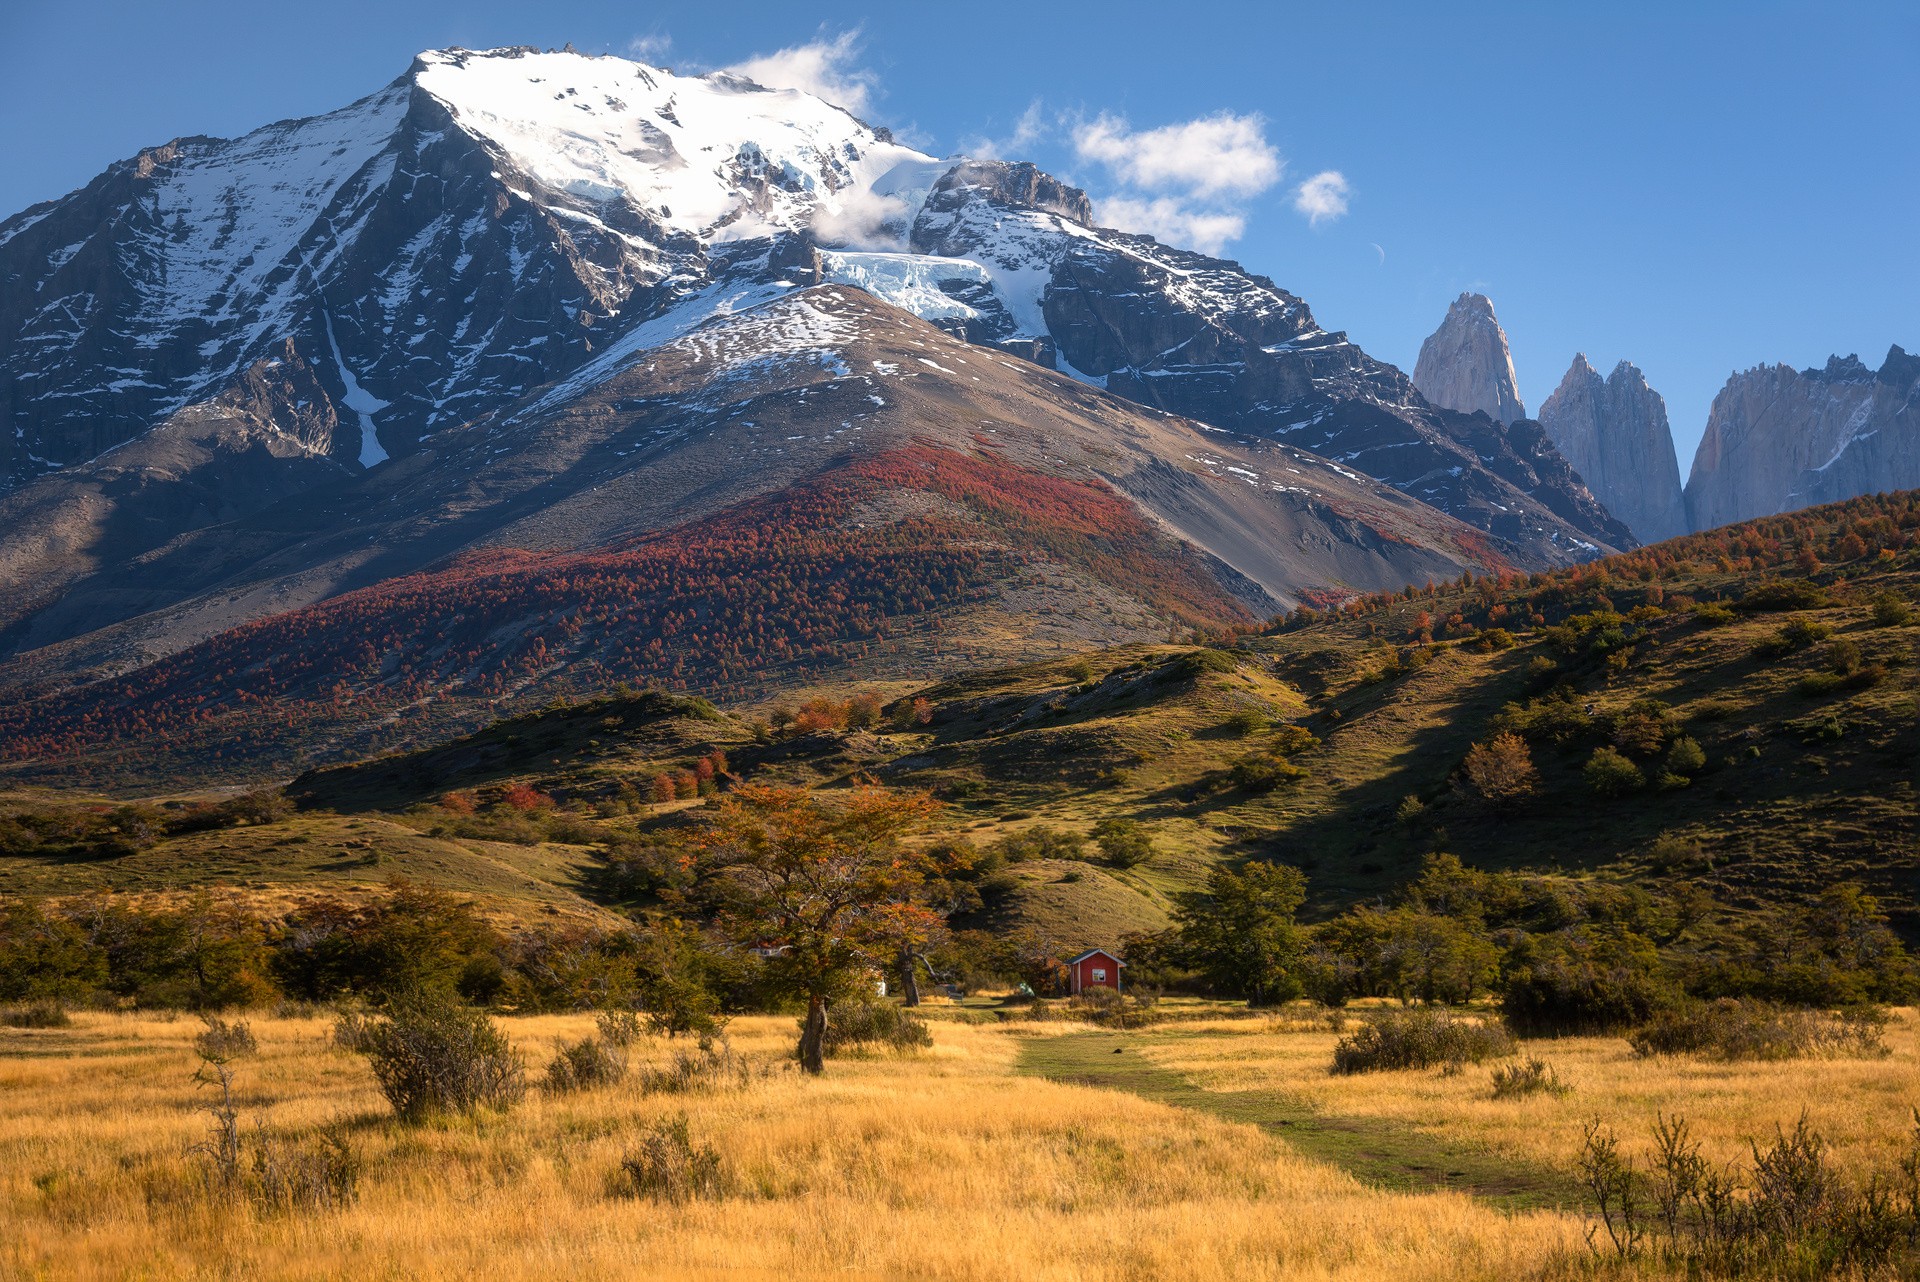 General 1920x1282 nature landscape mountains trees shrubs snowy peak Chile cottage grass South America snowy mountain